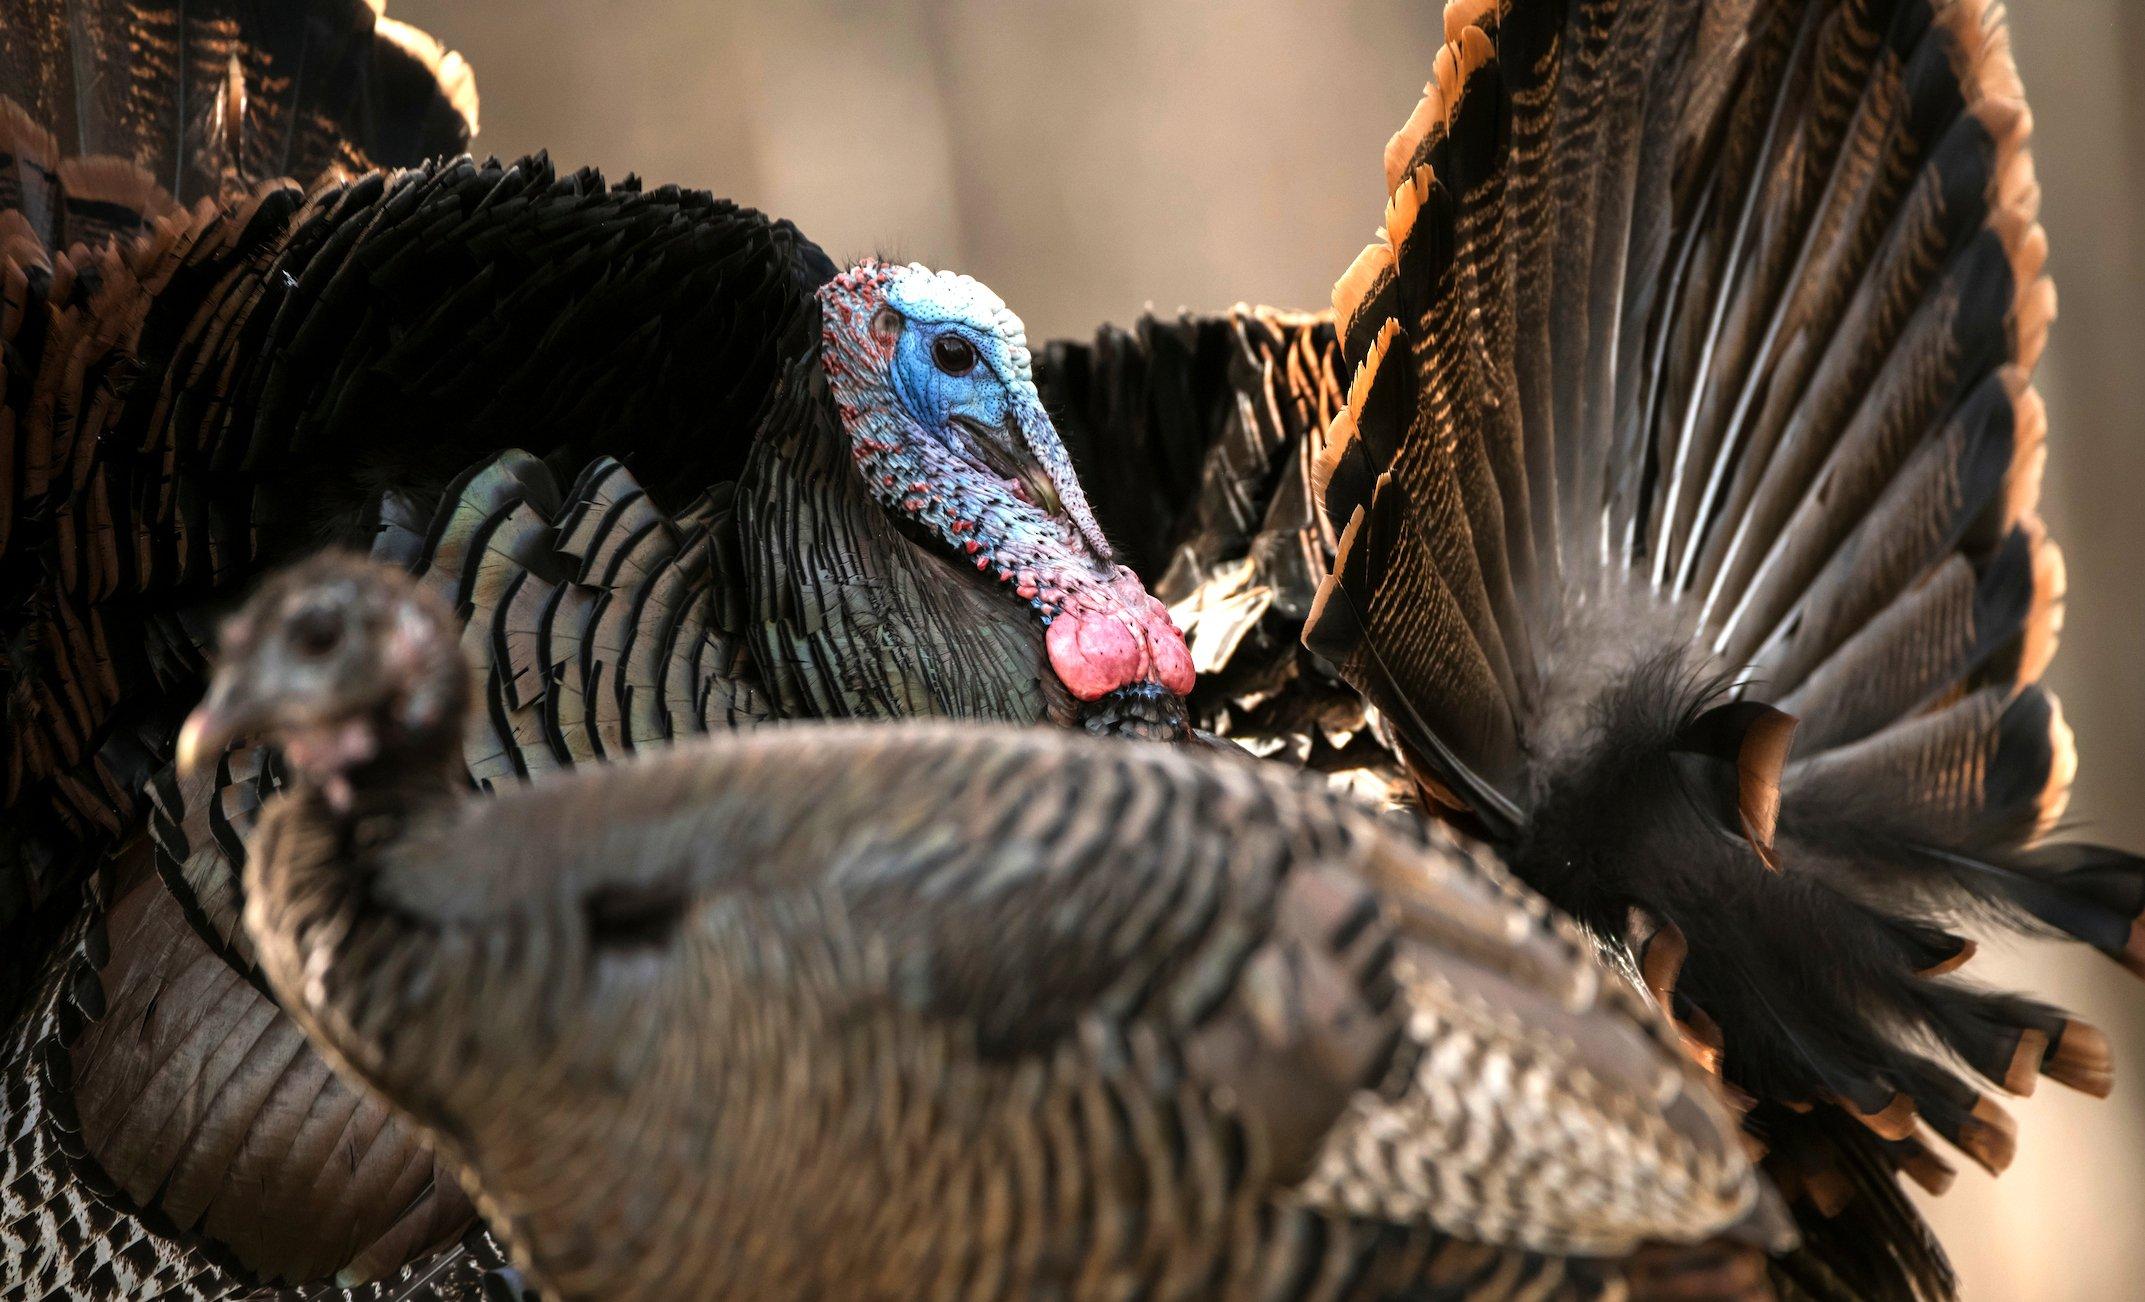 Wild turkey numbers plummeted around the turn of the century nearly to the point of no return. Image by John Hefner